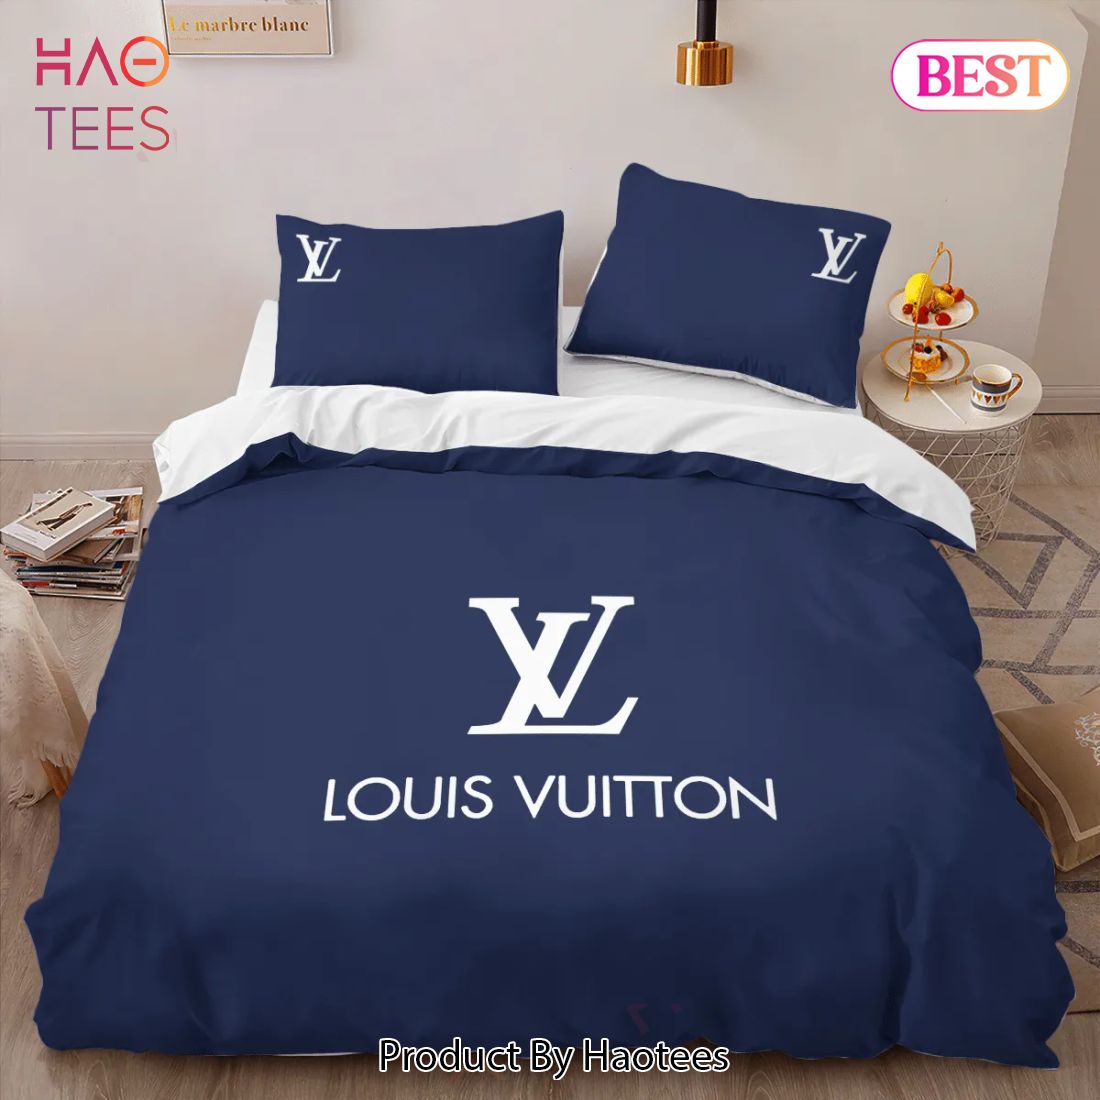 NEW] Louis Vuitton Blue Luxury Brand Bedding Sets All Over Printed